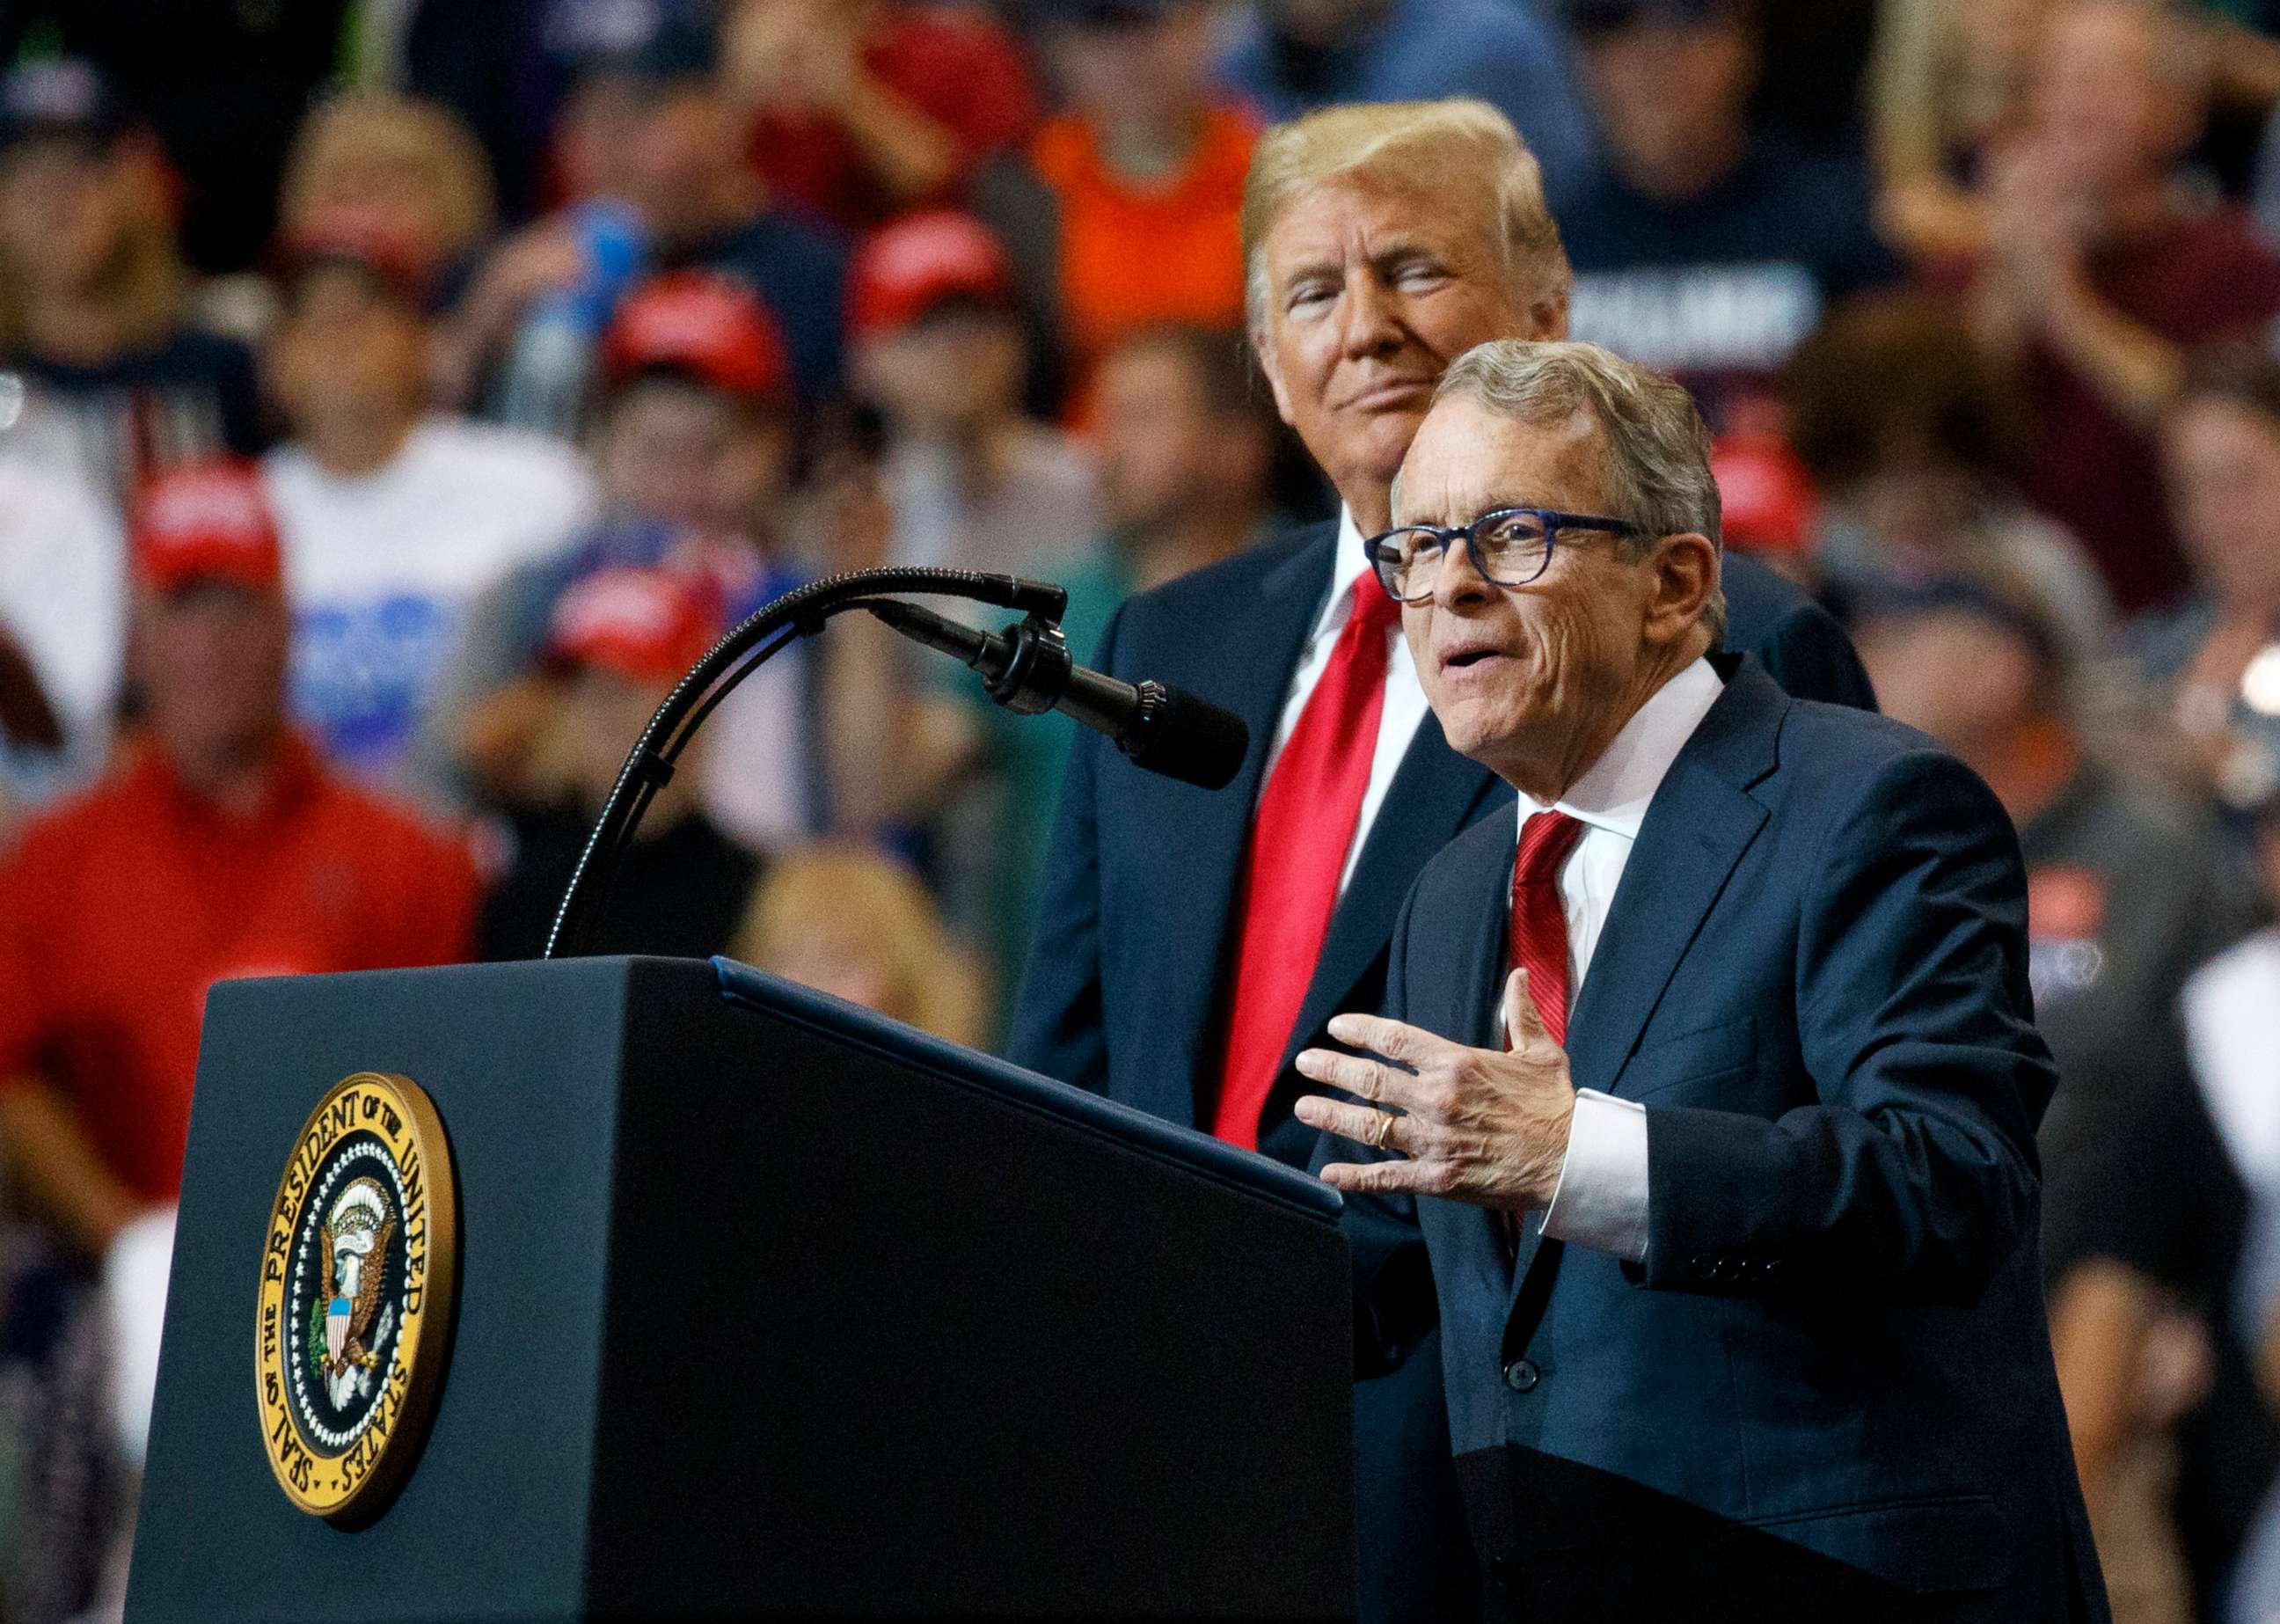 PHOTO: President Donald Trump stands with gubernatorial candidate Mike DeWine as he speaks during a rally in Cleveland, Ohio, Nov. 5, 2018.